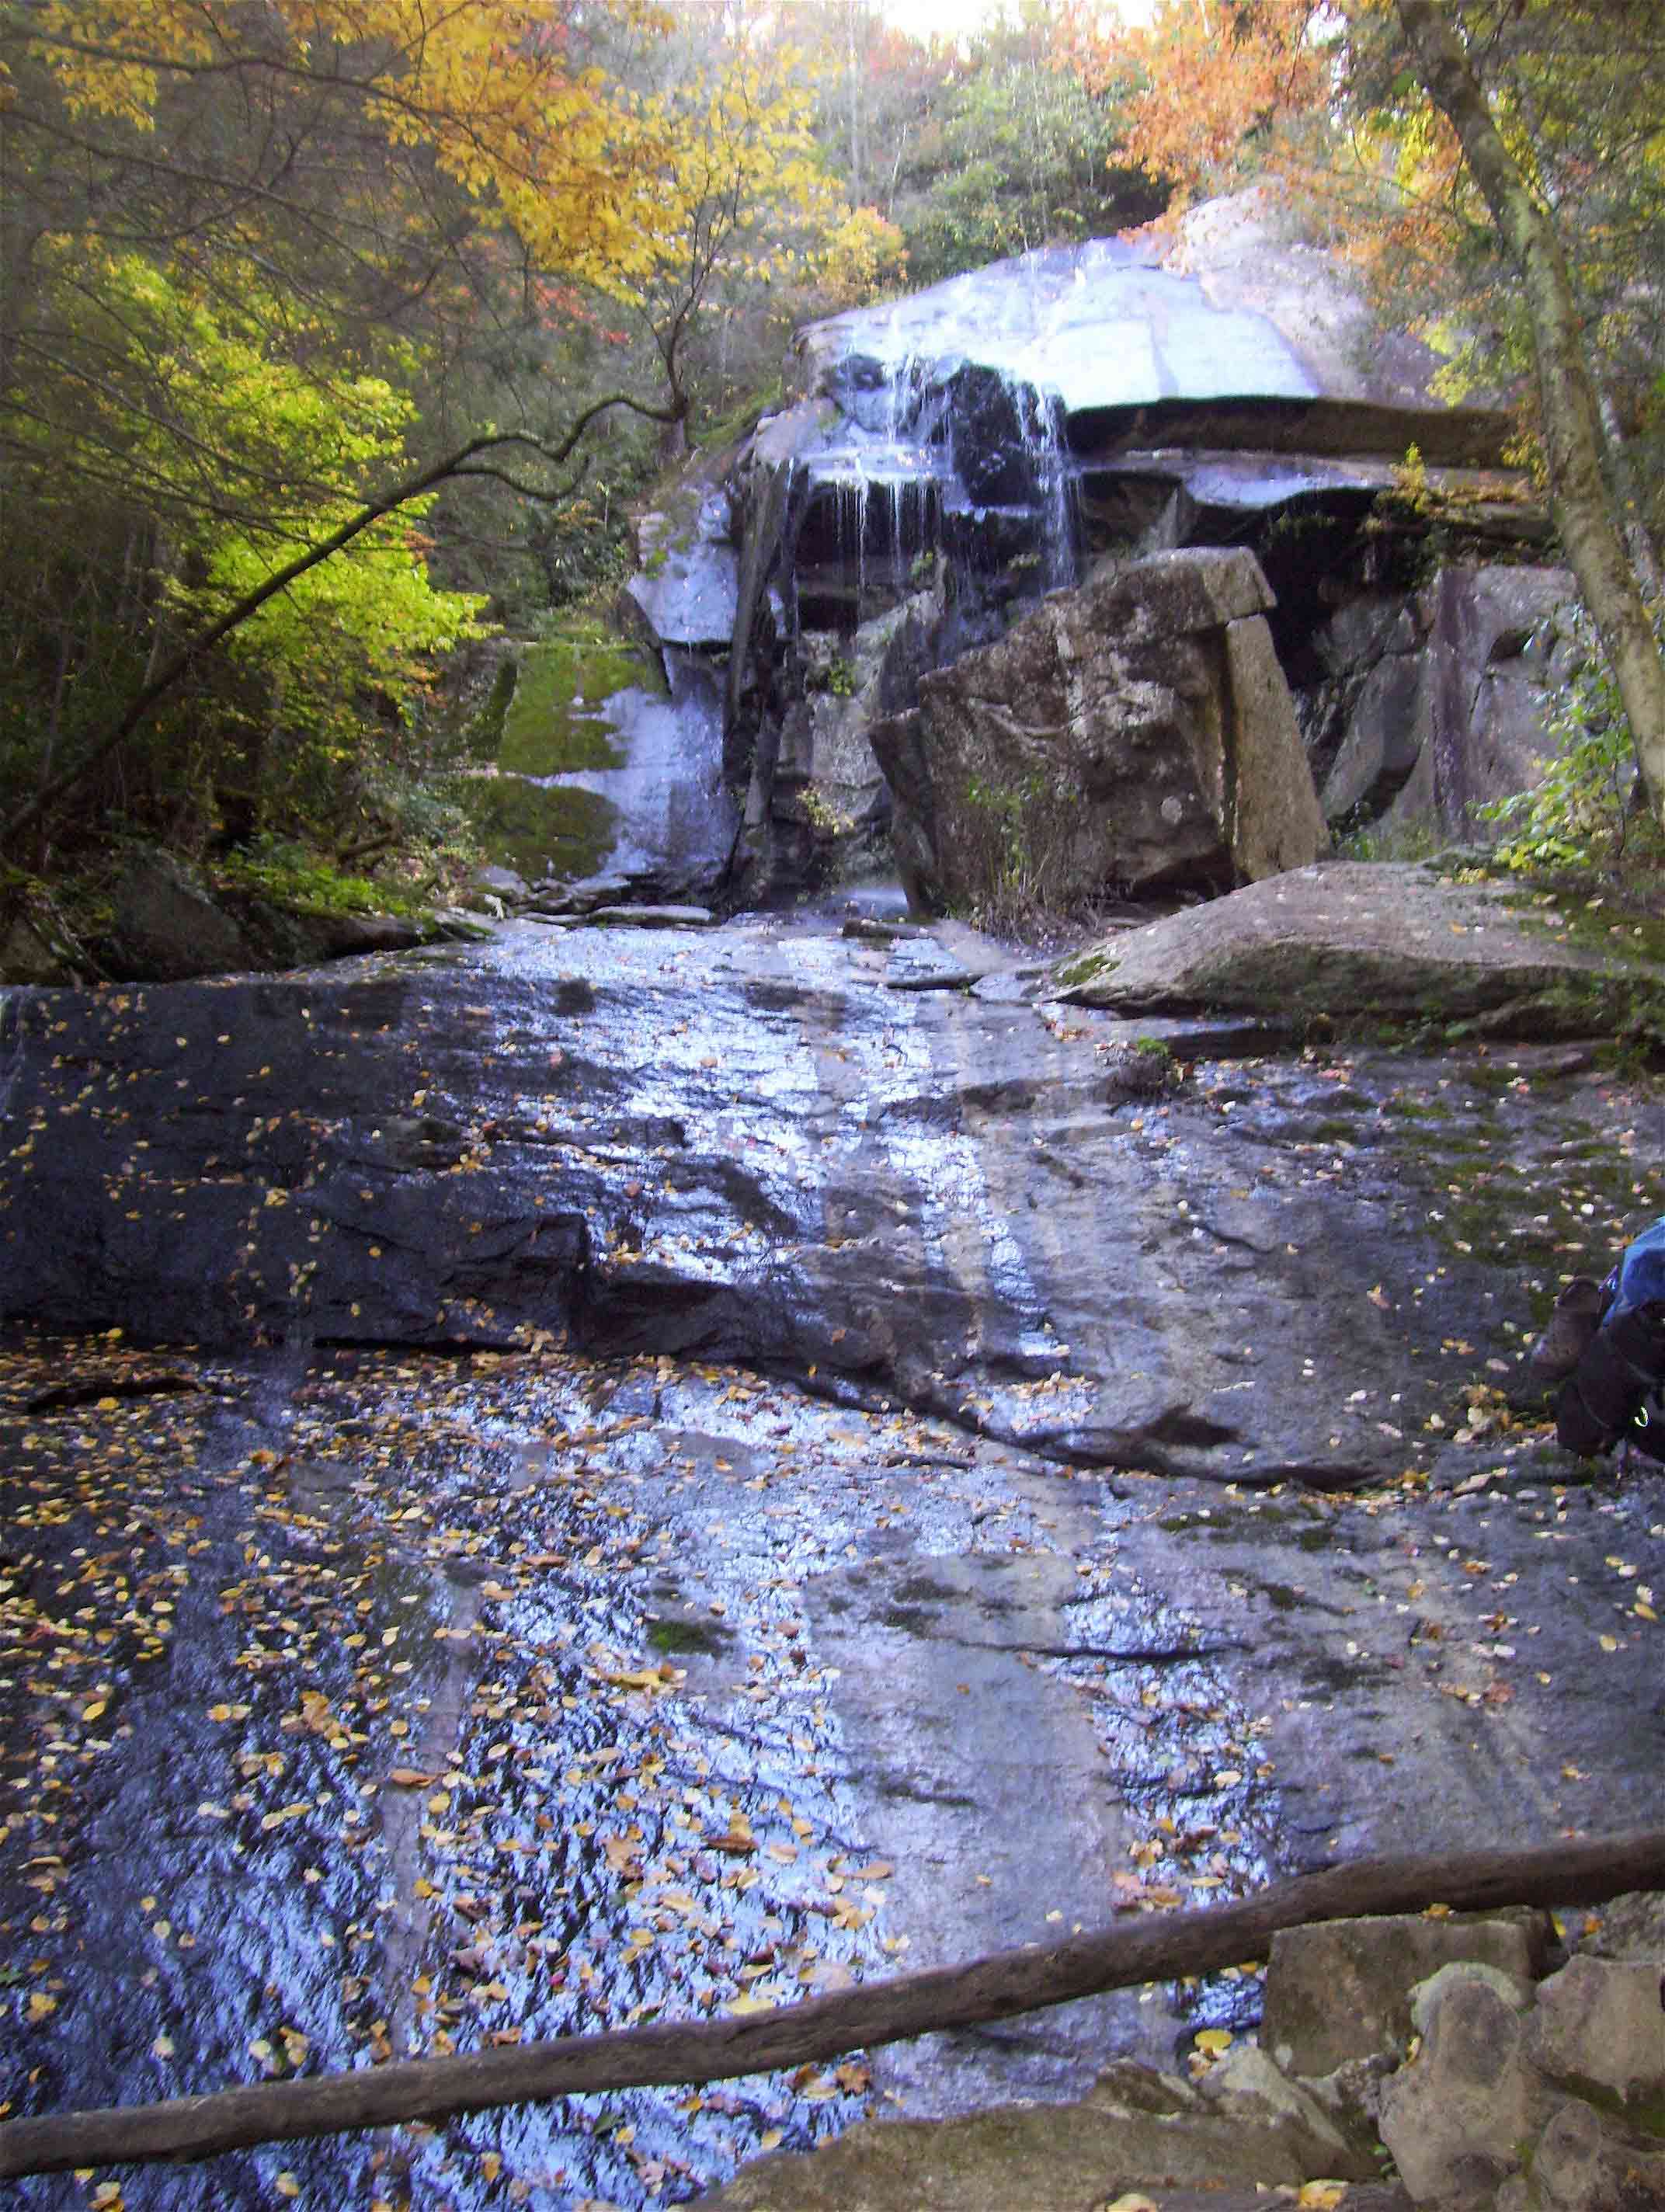 mm 19.0  Jones Falls is at the end of a 0.1 blue-blazed spur off of the AT. The waterfall is 100 feet high and impressive even with the low water level found in October of a drought year (2008).   Courtesy dlcul@conncoll.edu